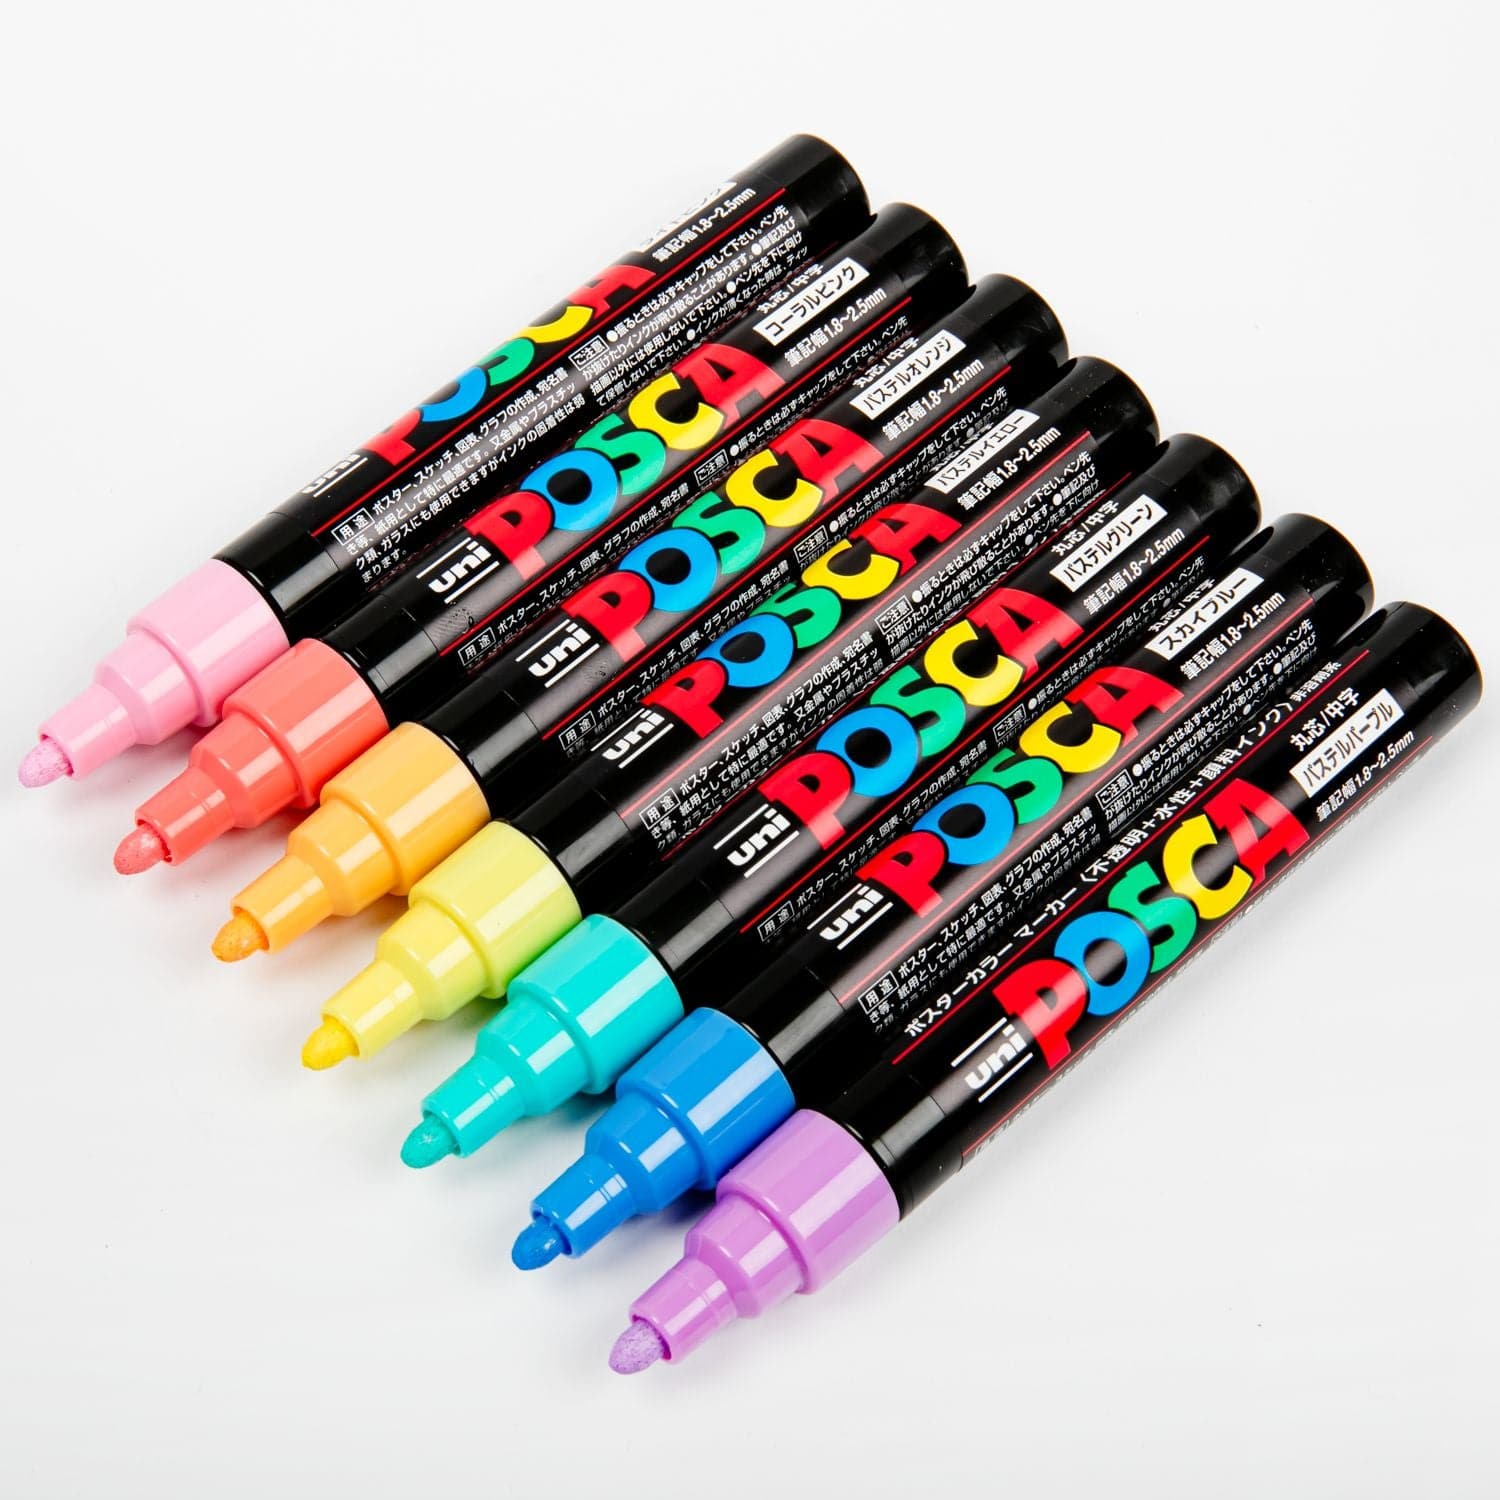 https://www.shopriot.shop/wp-content/uploads/1689/28/posca-paint-marker-pen-medium-point-set-of-7-natural-color-pc-5m-7c-959-keep-active-and-fit-keep-active-and-fit-keep-active-and-fit_3.jpg